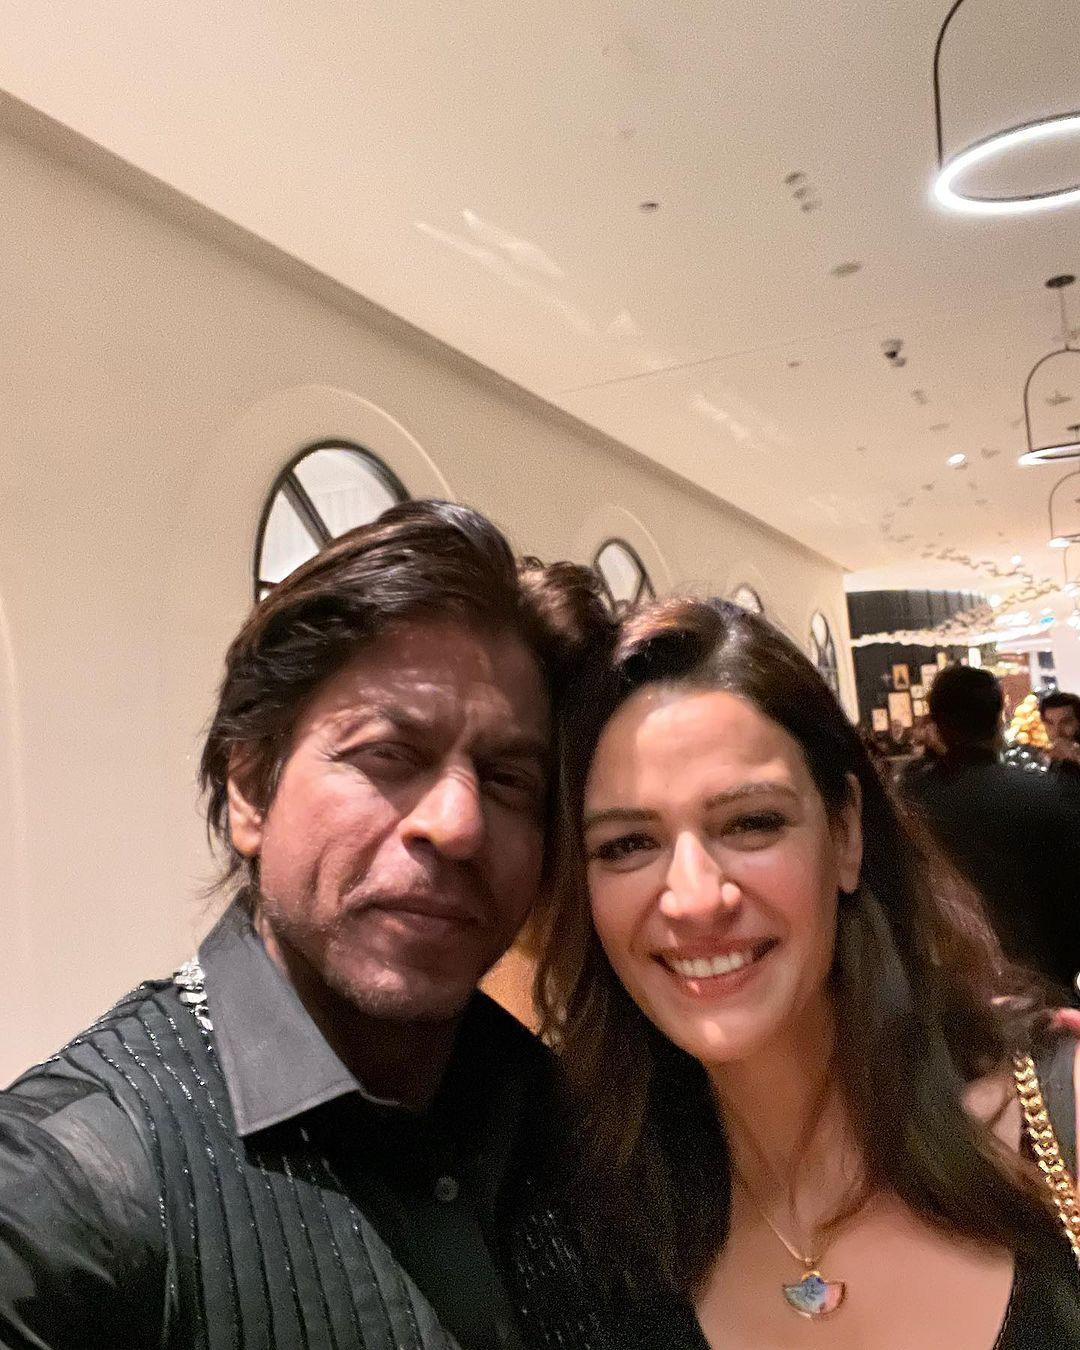 Mona Singh took to Instagram to post a picture with King Khan from the bash